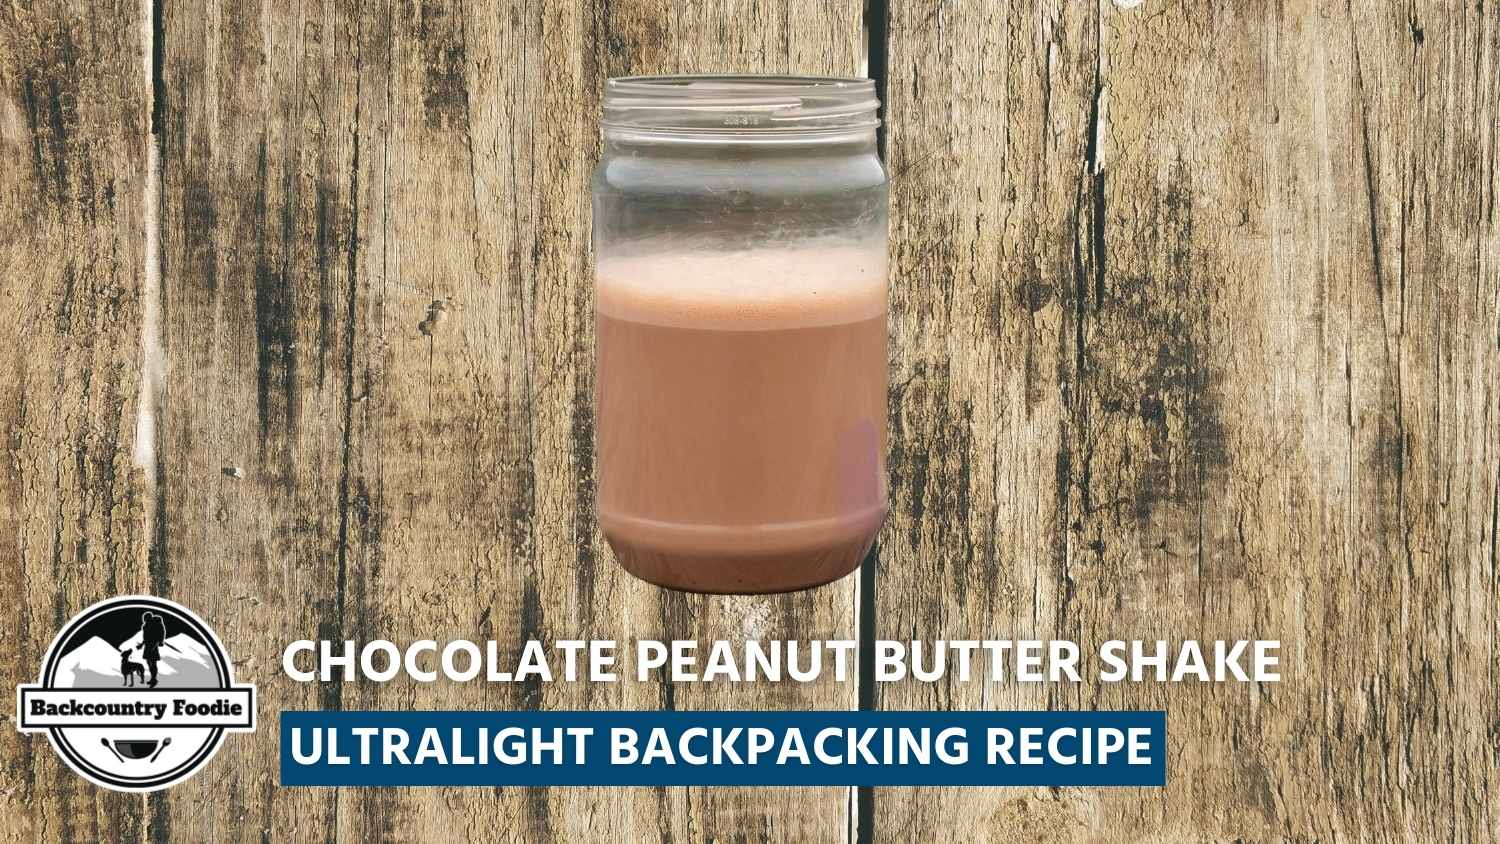 Backcountry Foodie Blog Chocolate Peanut Butter Shake Ultralight Backpacking Recipe